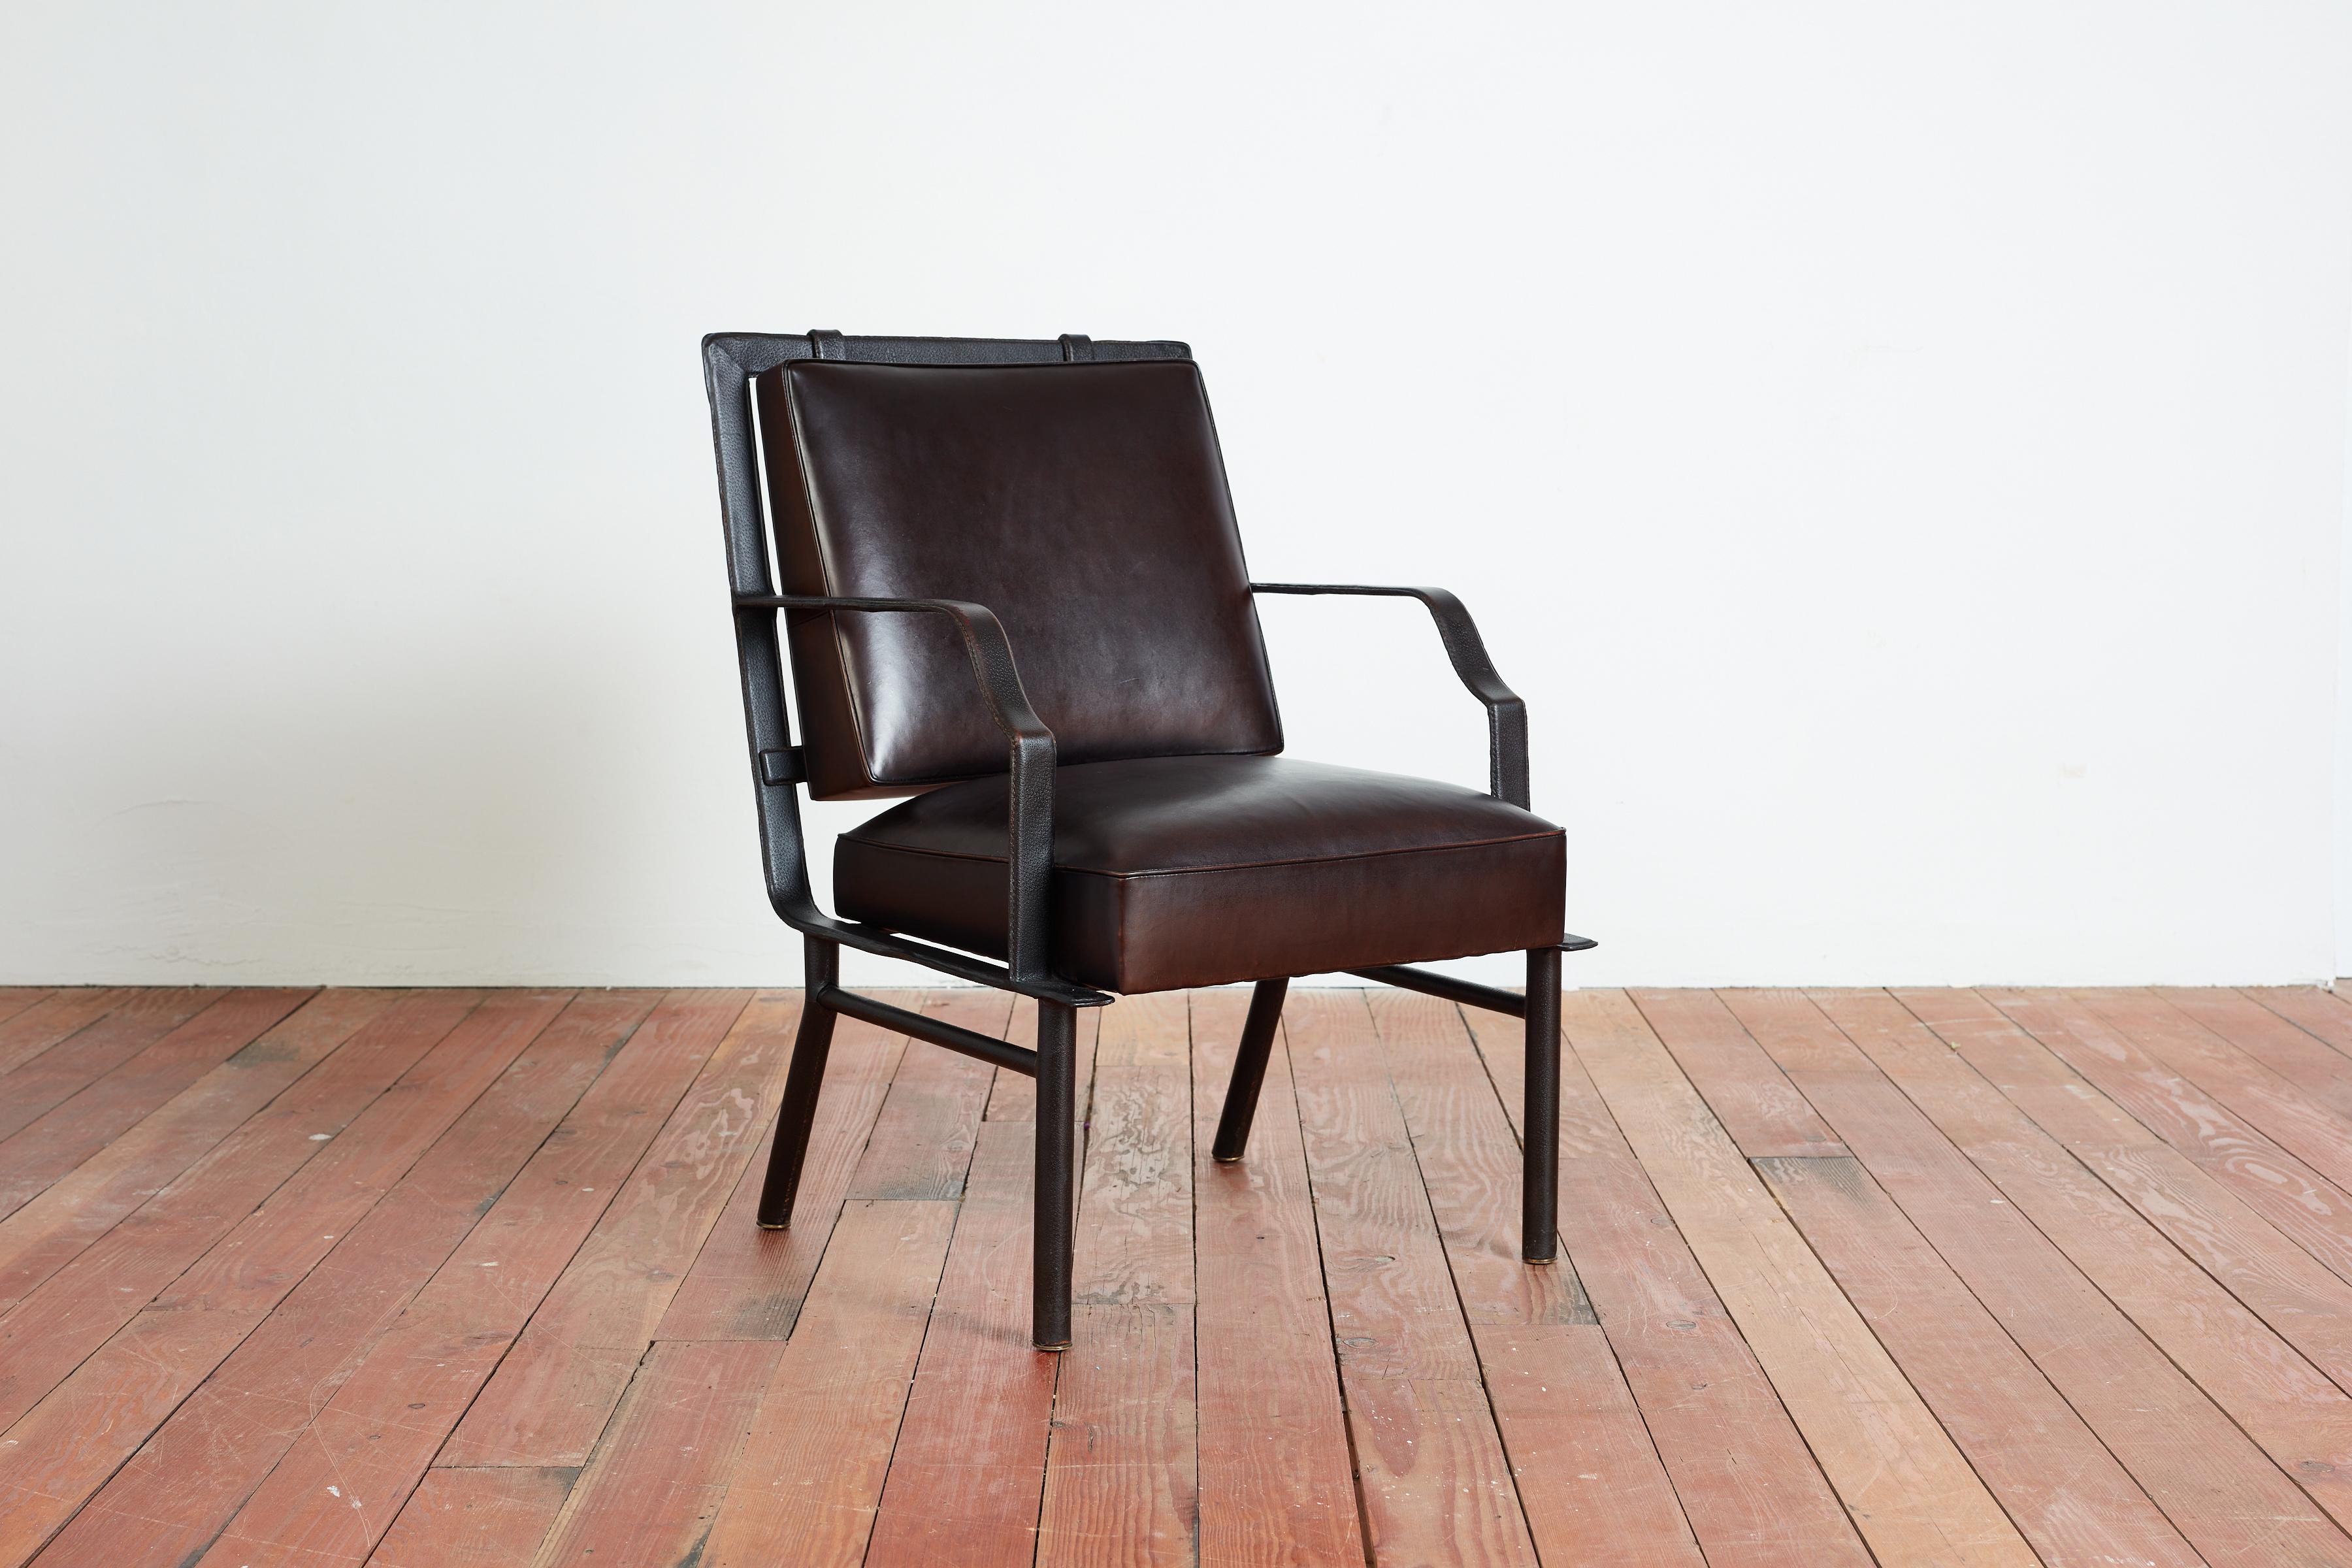 Rare Jacques Adnet Arm Chair 
Signature saddle stitched leather over heavy steel with deep chocolate seat and back
Floating back cushion is attached with unique saddle stitched clips
Wonderful design.
France, c. 1955

